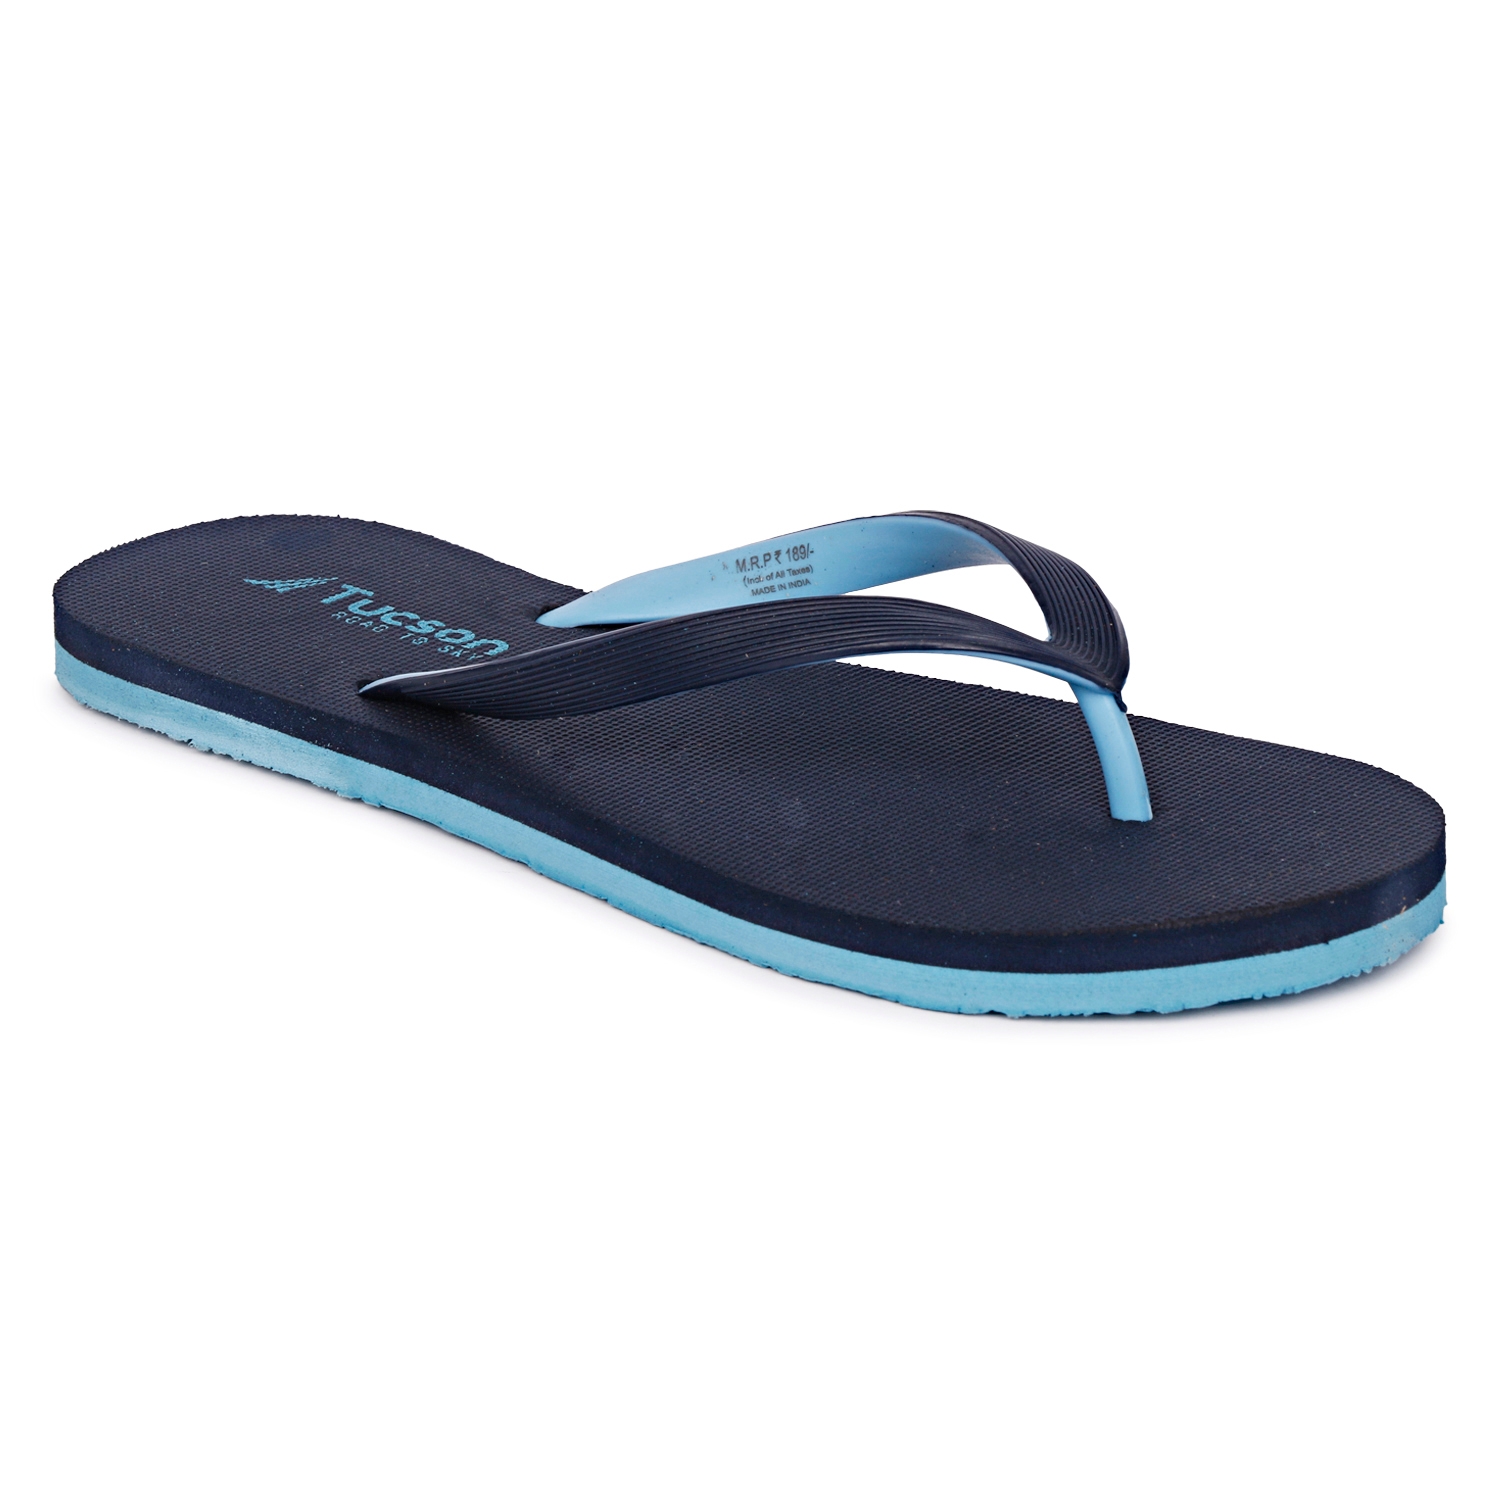 TUCSON | Tucson Rubber Soft|Comfortable|LightWeight Slippers|FlipFlop|Chappal For Women